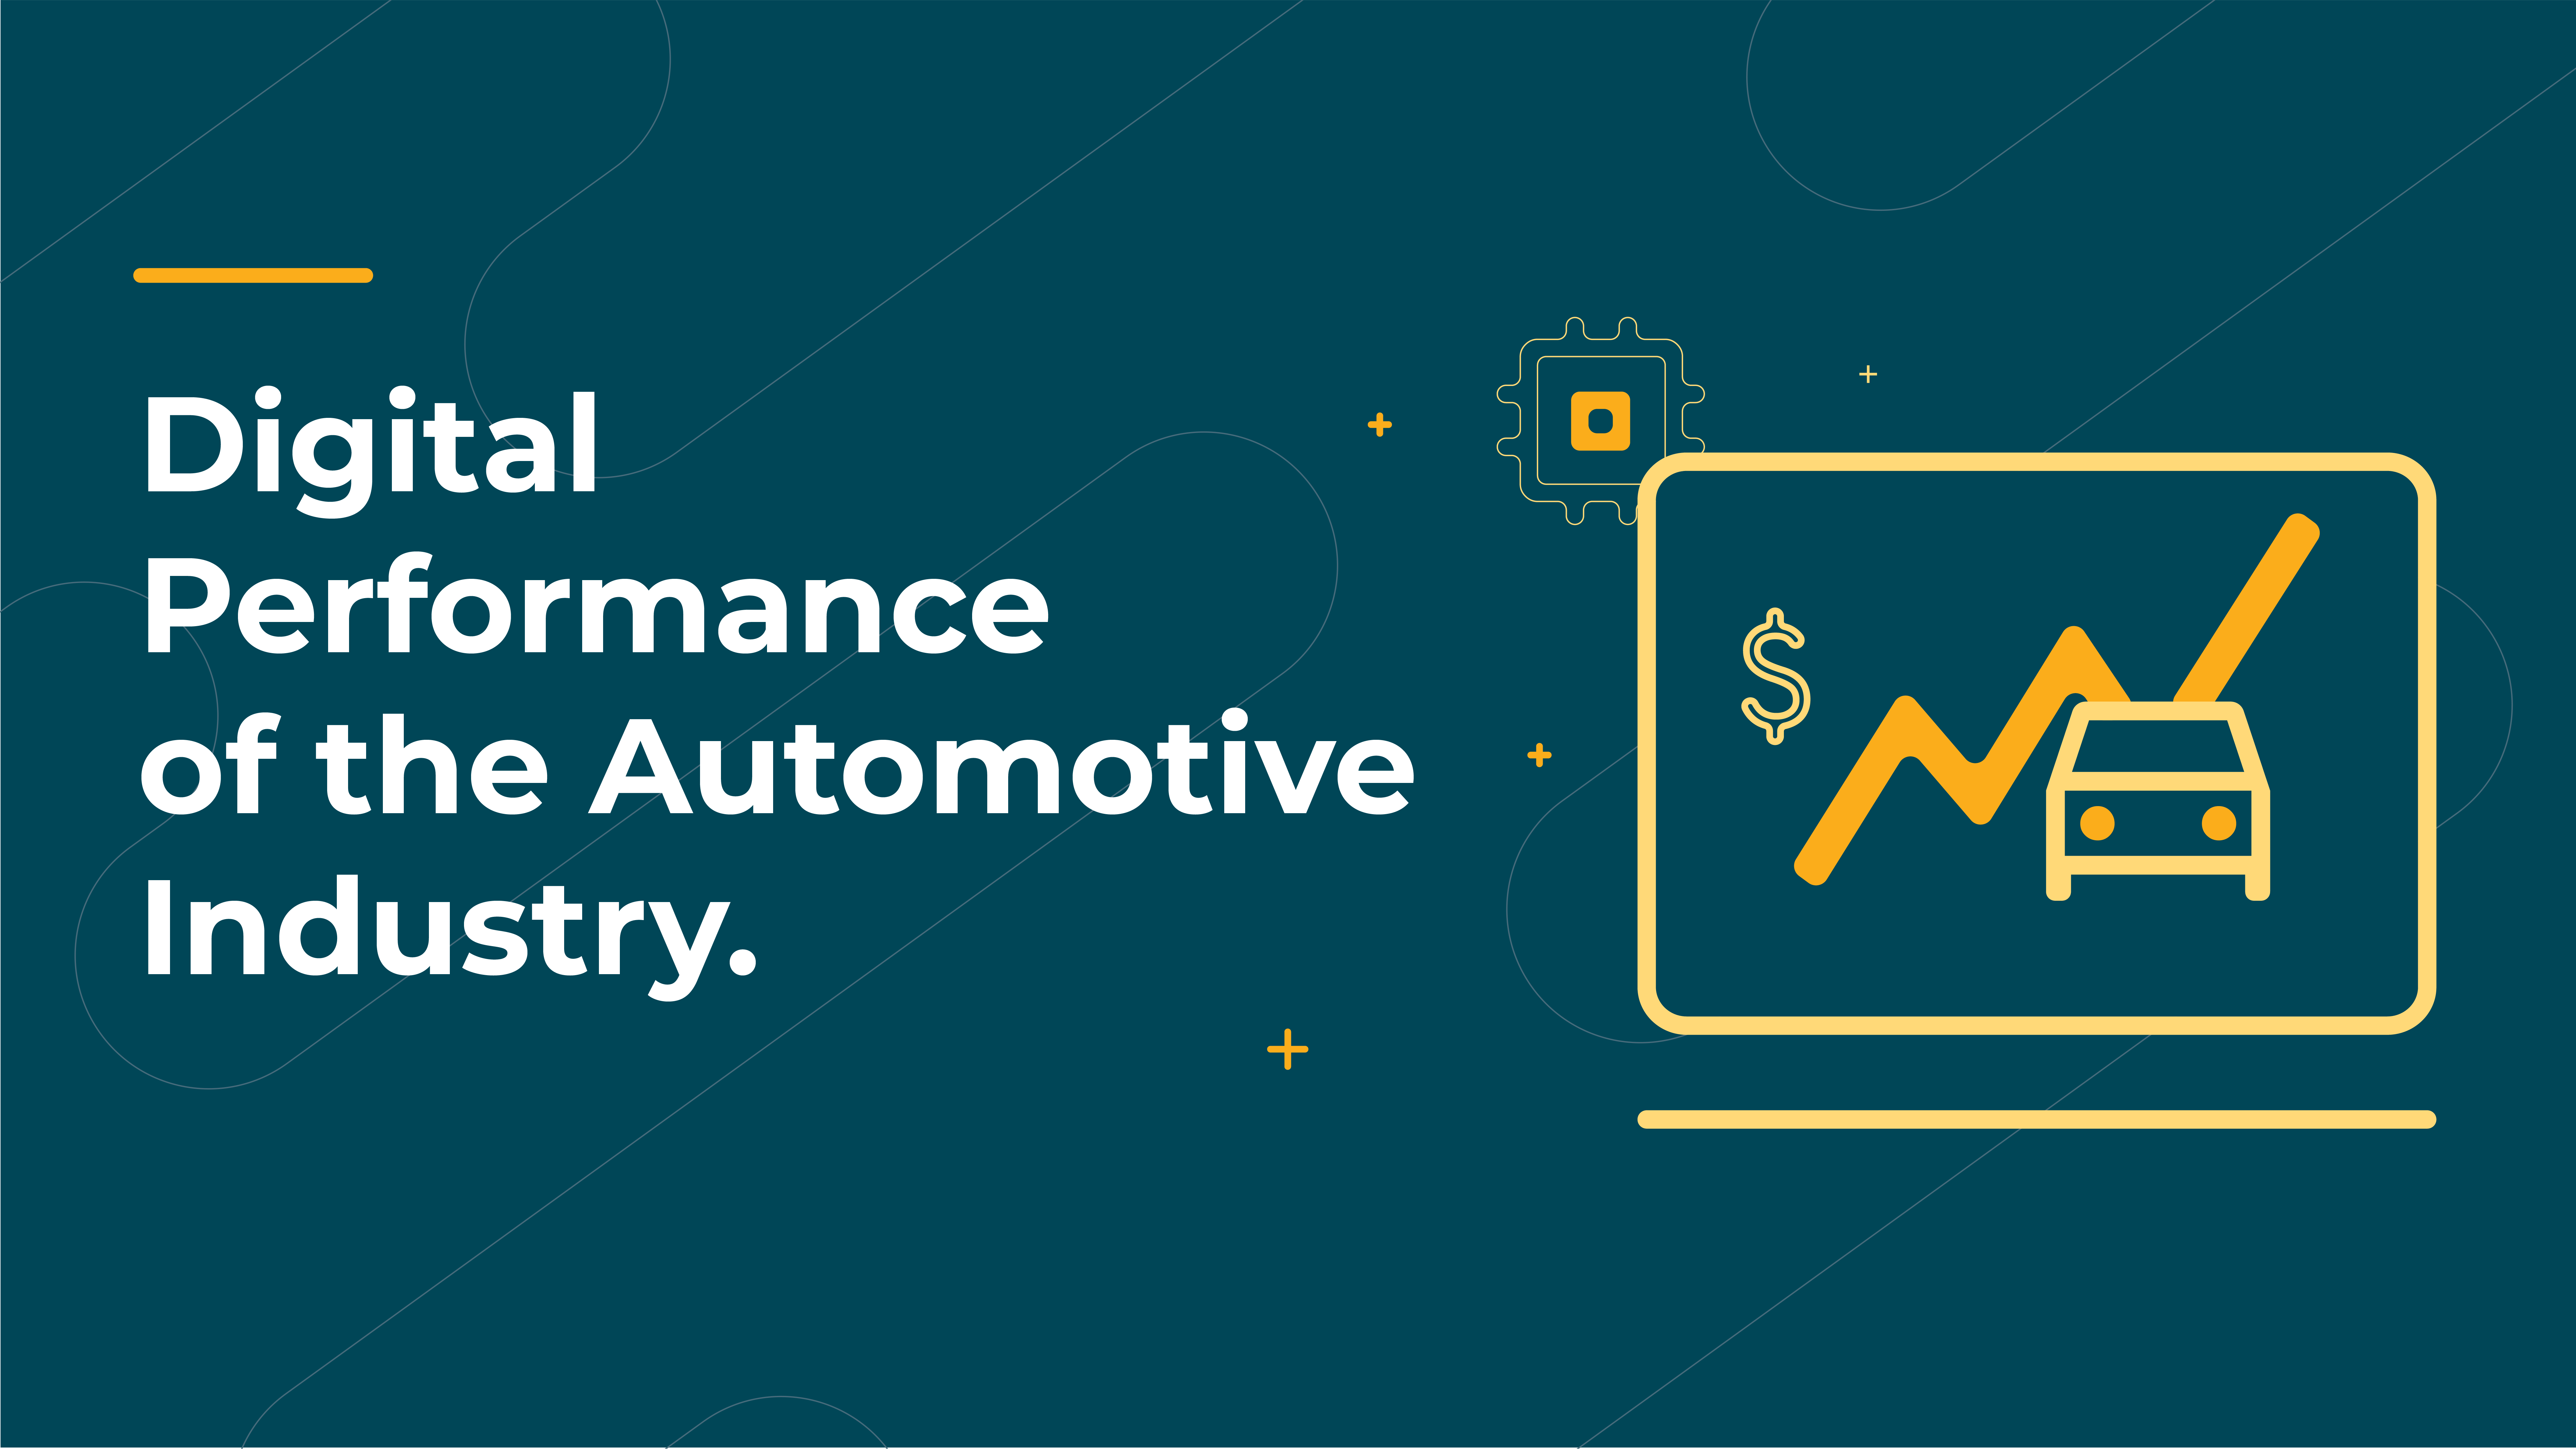 Digital Performance of the Automotive Industry